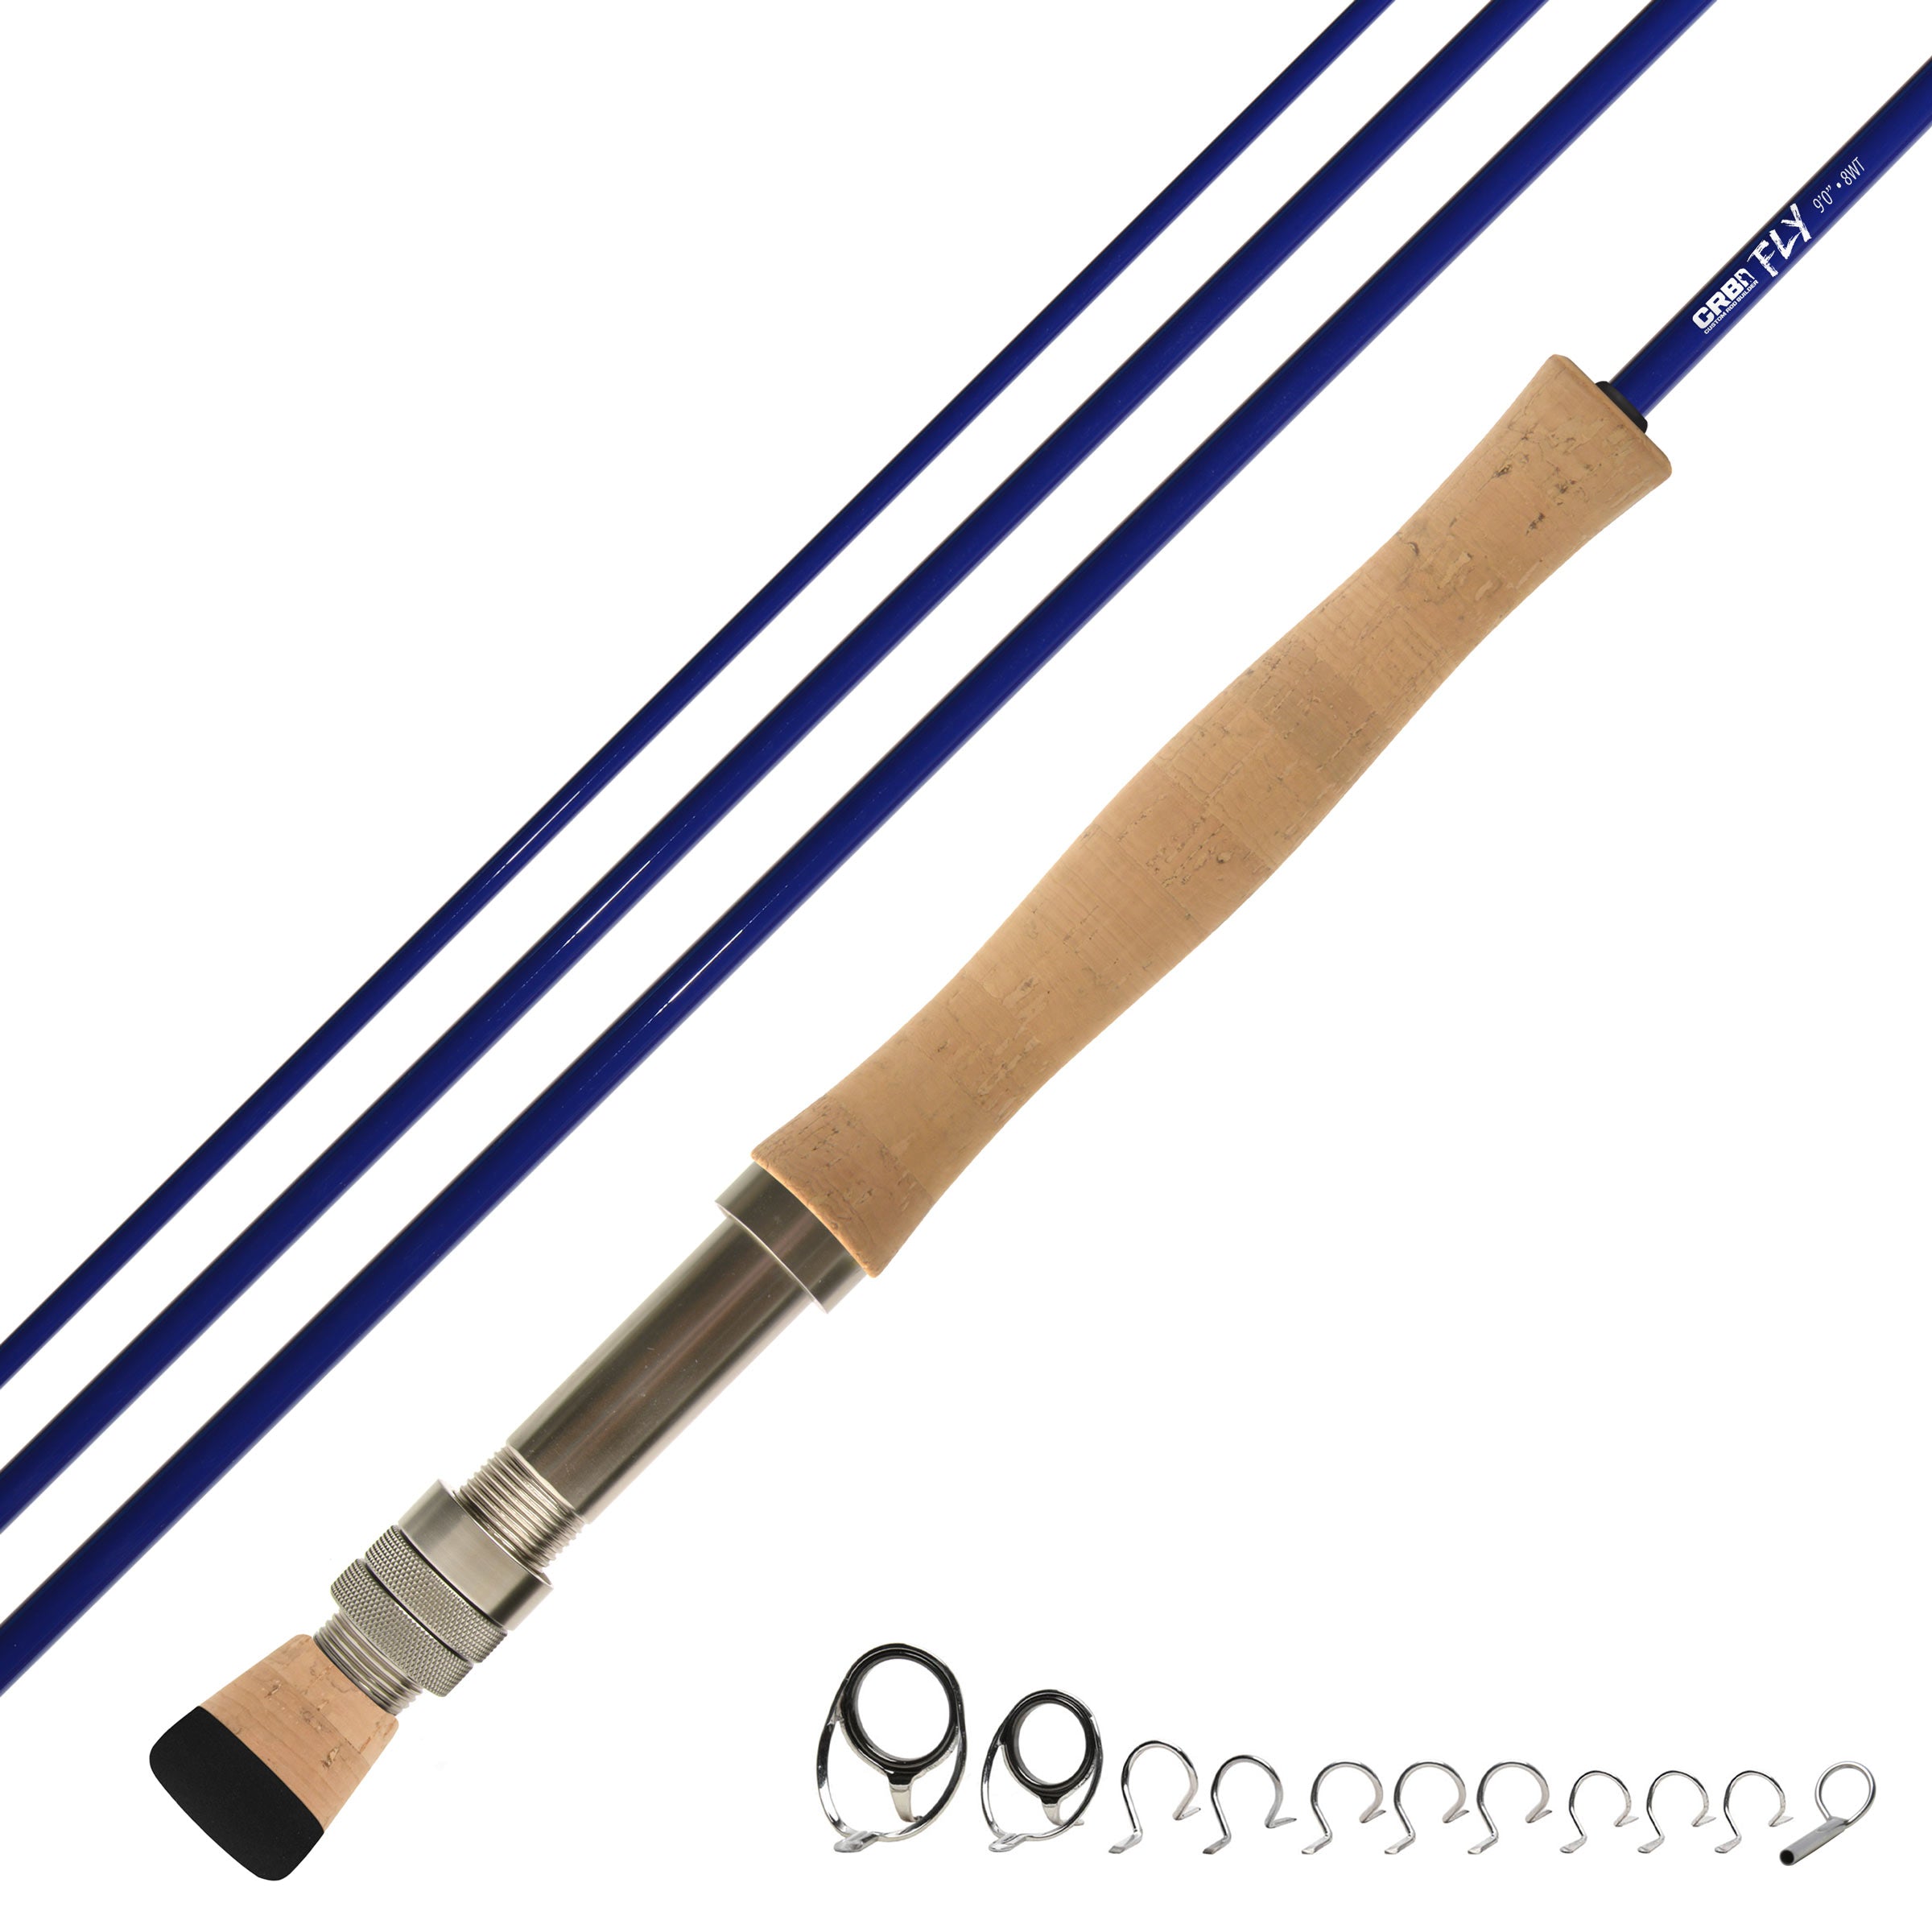 CRB 9'0 8wt Color Series Fly Rod Kit